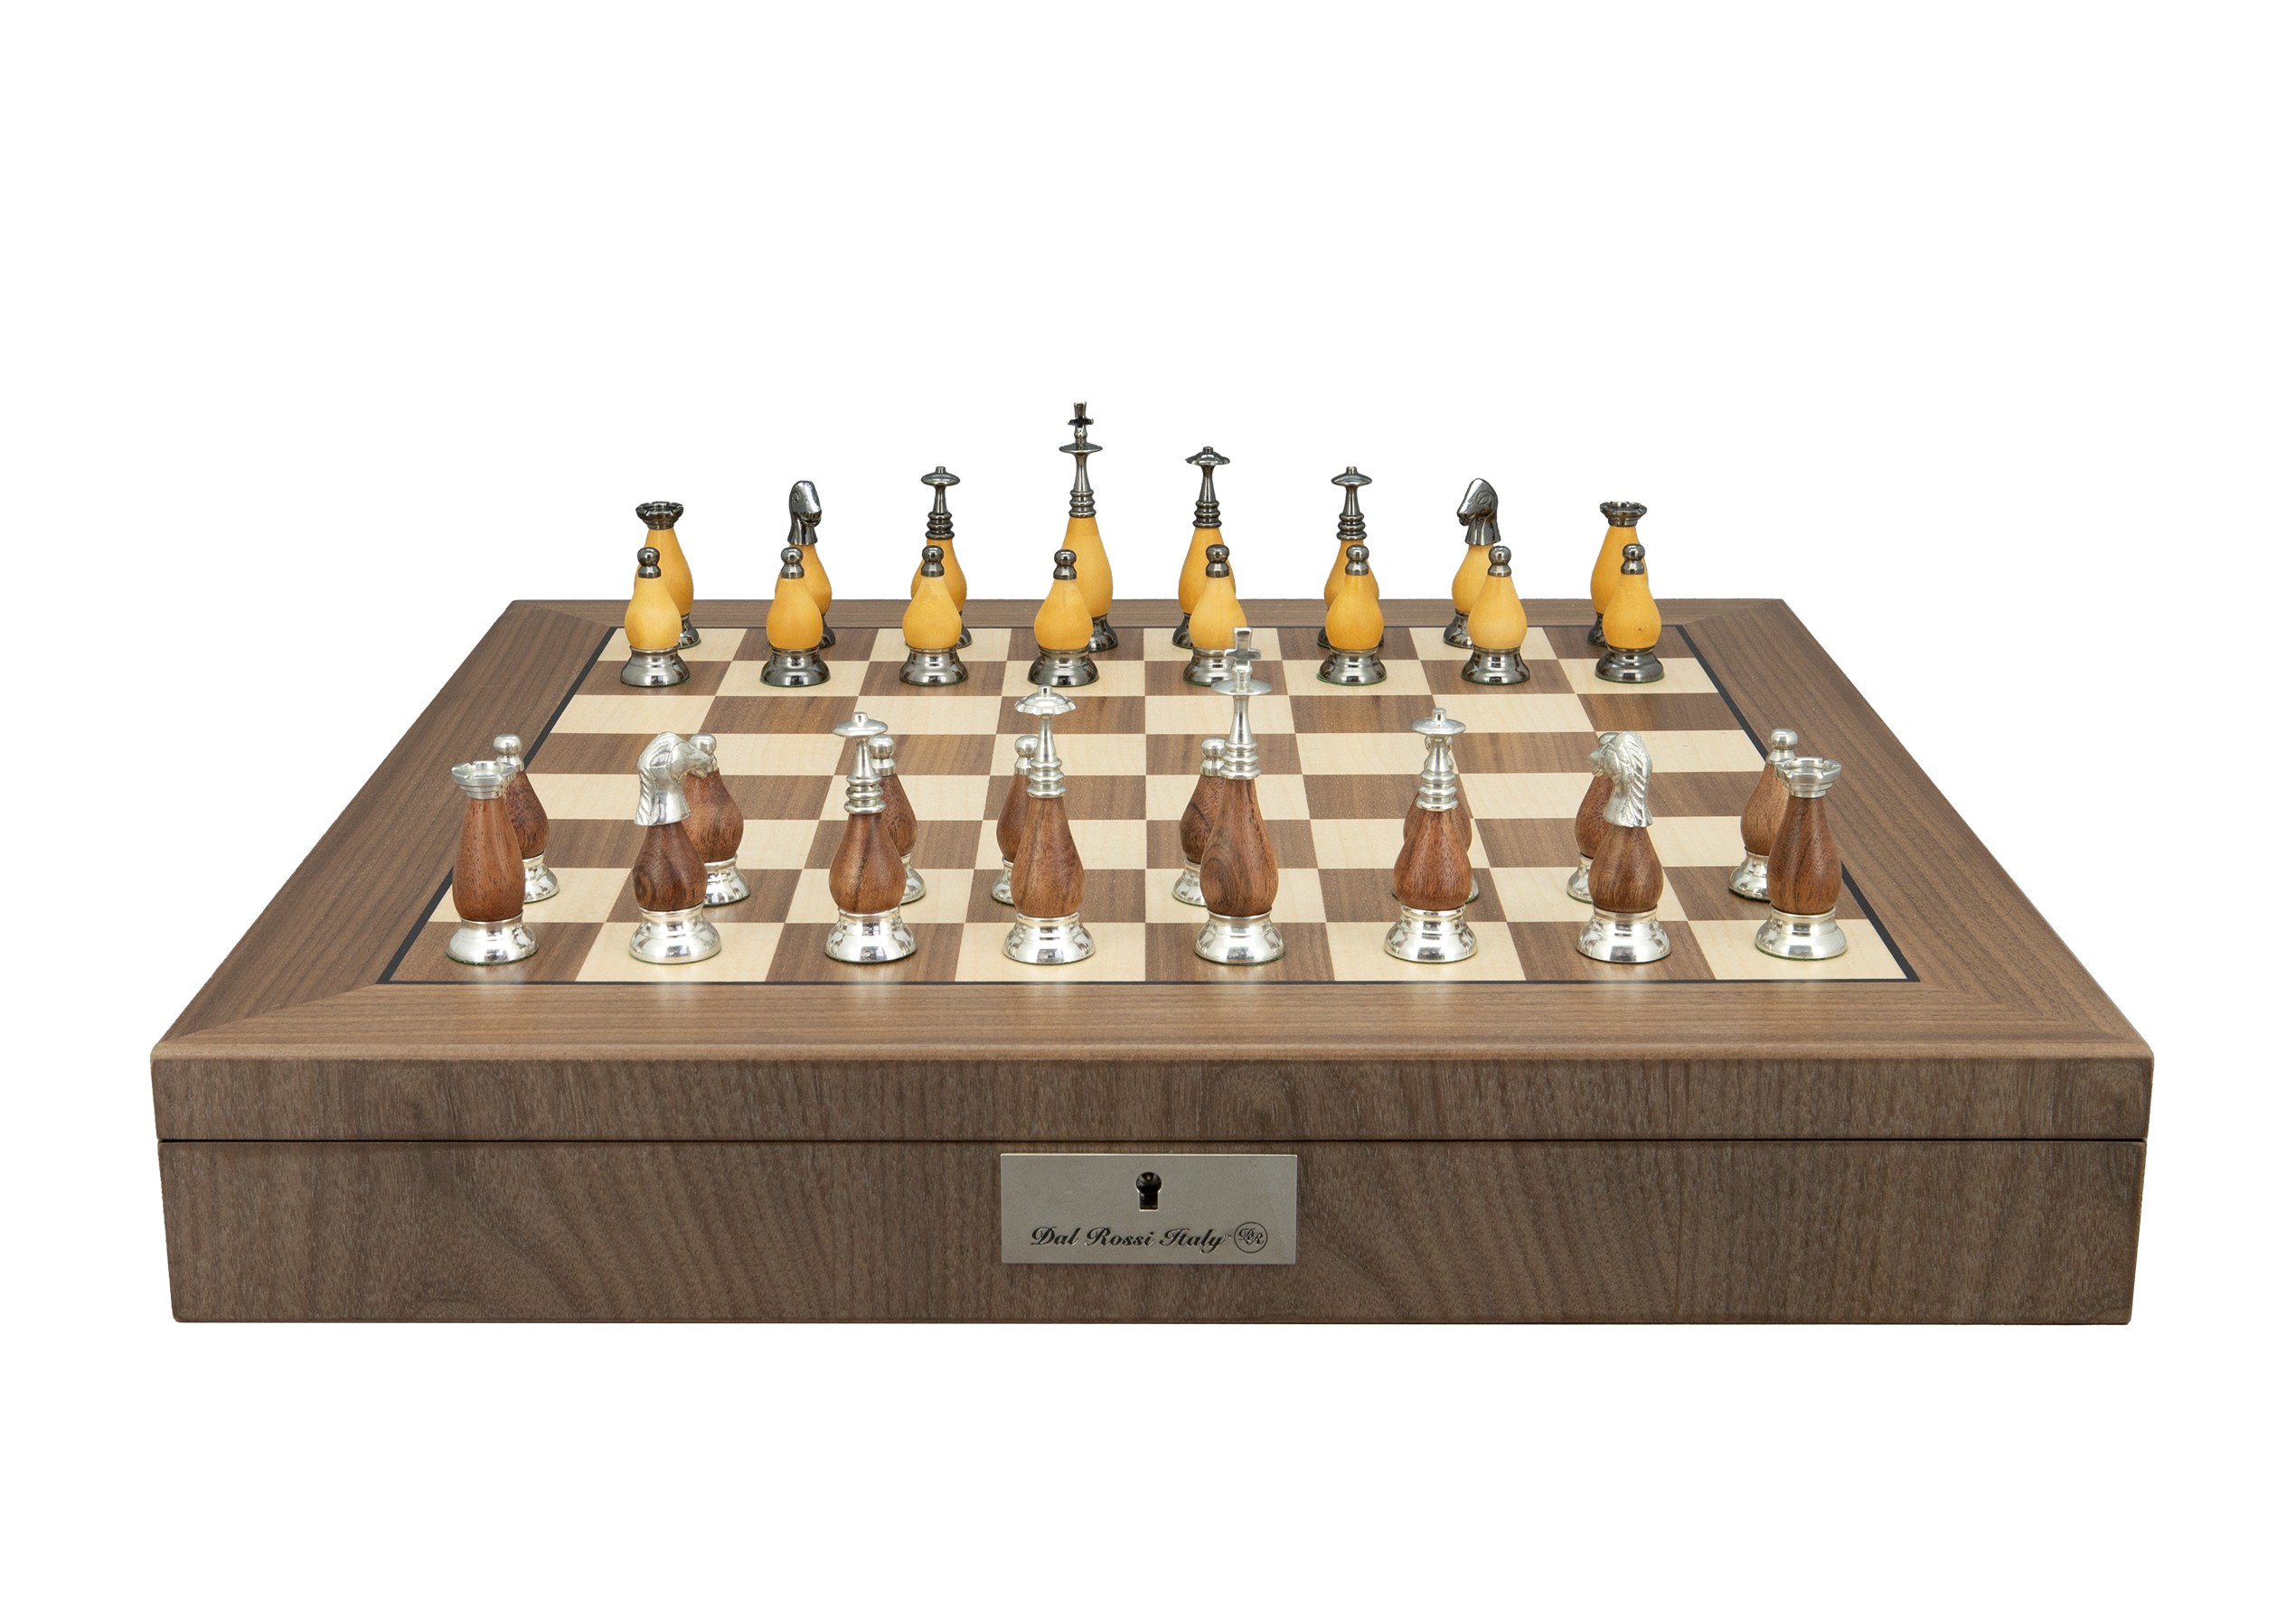 Dal Rossi Italy, Staunton Metal/Wood Chessmen on a Walnut Inlaid Chess Box with Compartments 20"